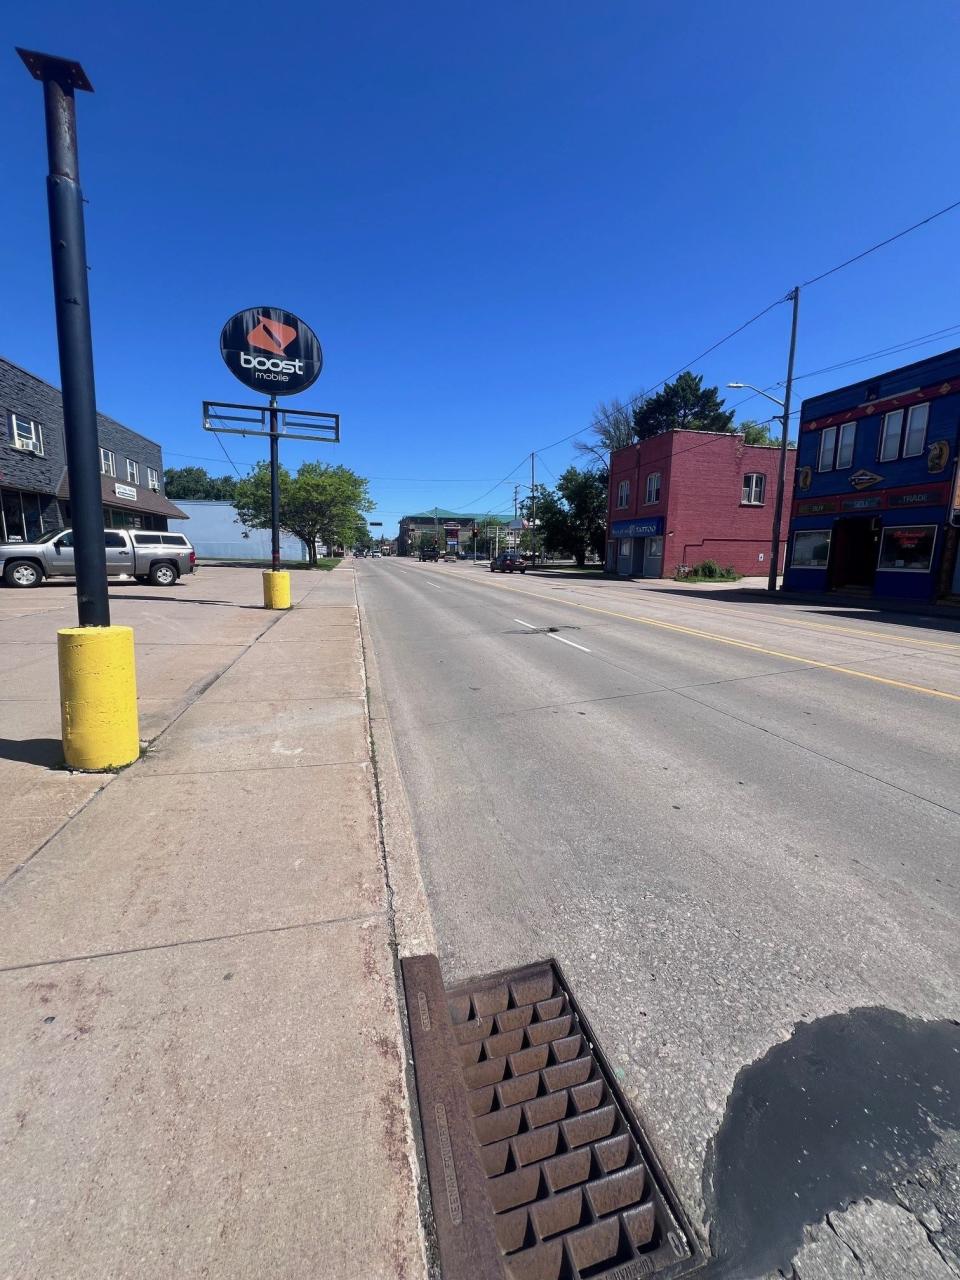 The small parking lot off Richmond Street, between College Avenue and Franklin Street in Appleton, Wis., has no marked division between it and the sidewalk, leading some drivers to cross into the sidewalk while trying to park.